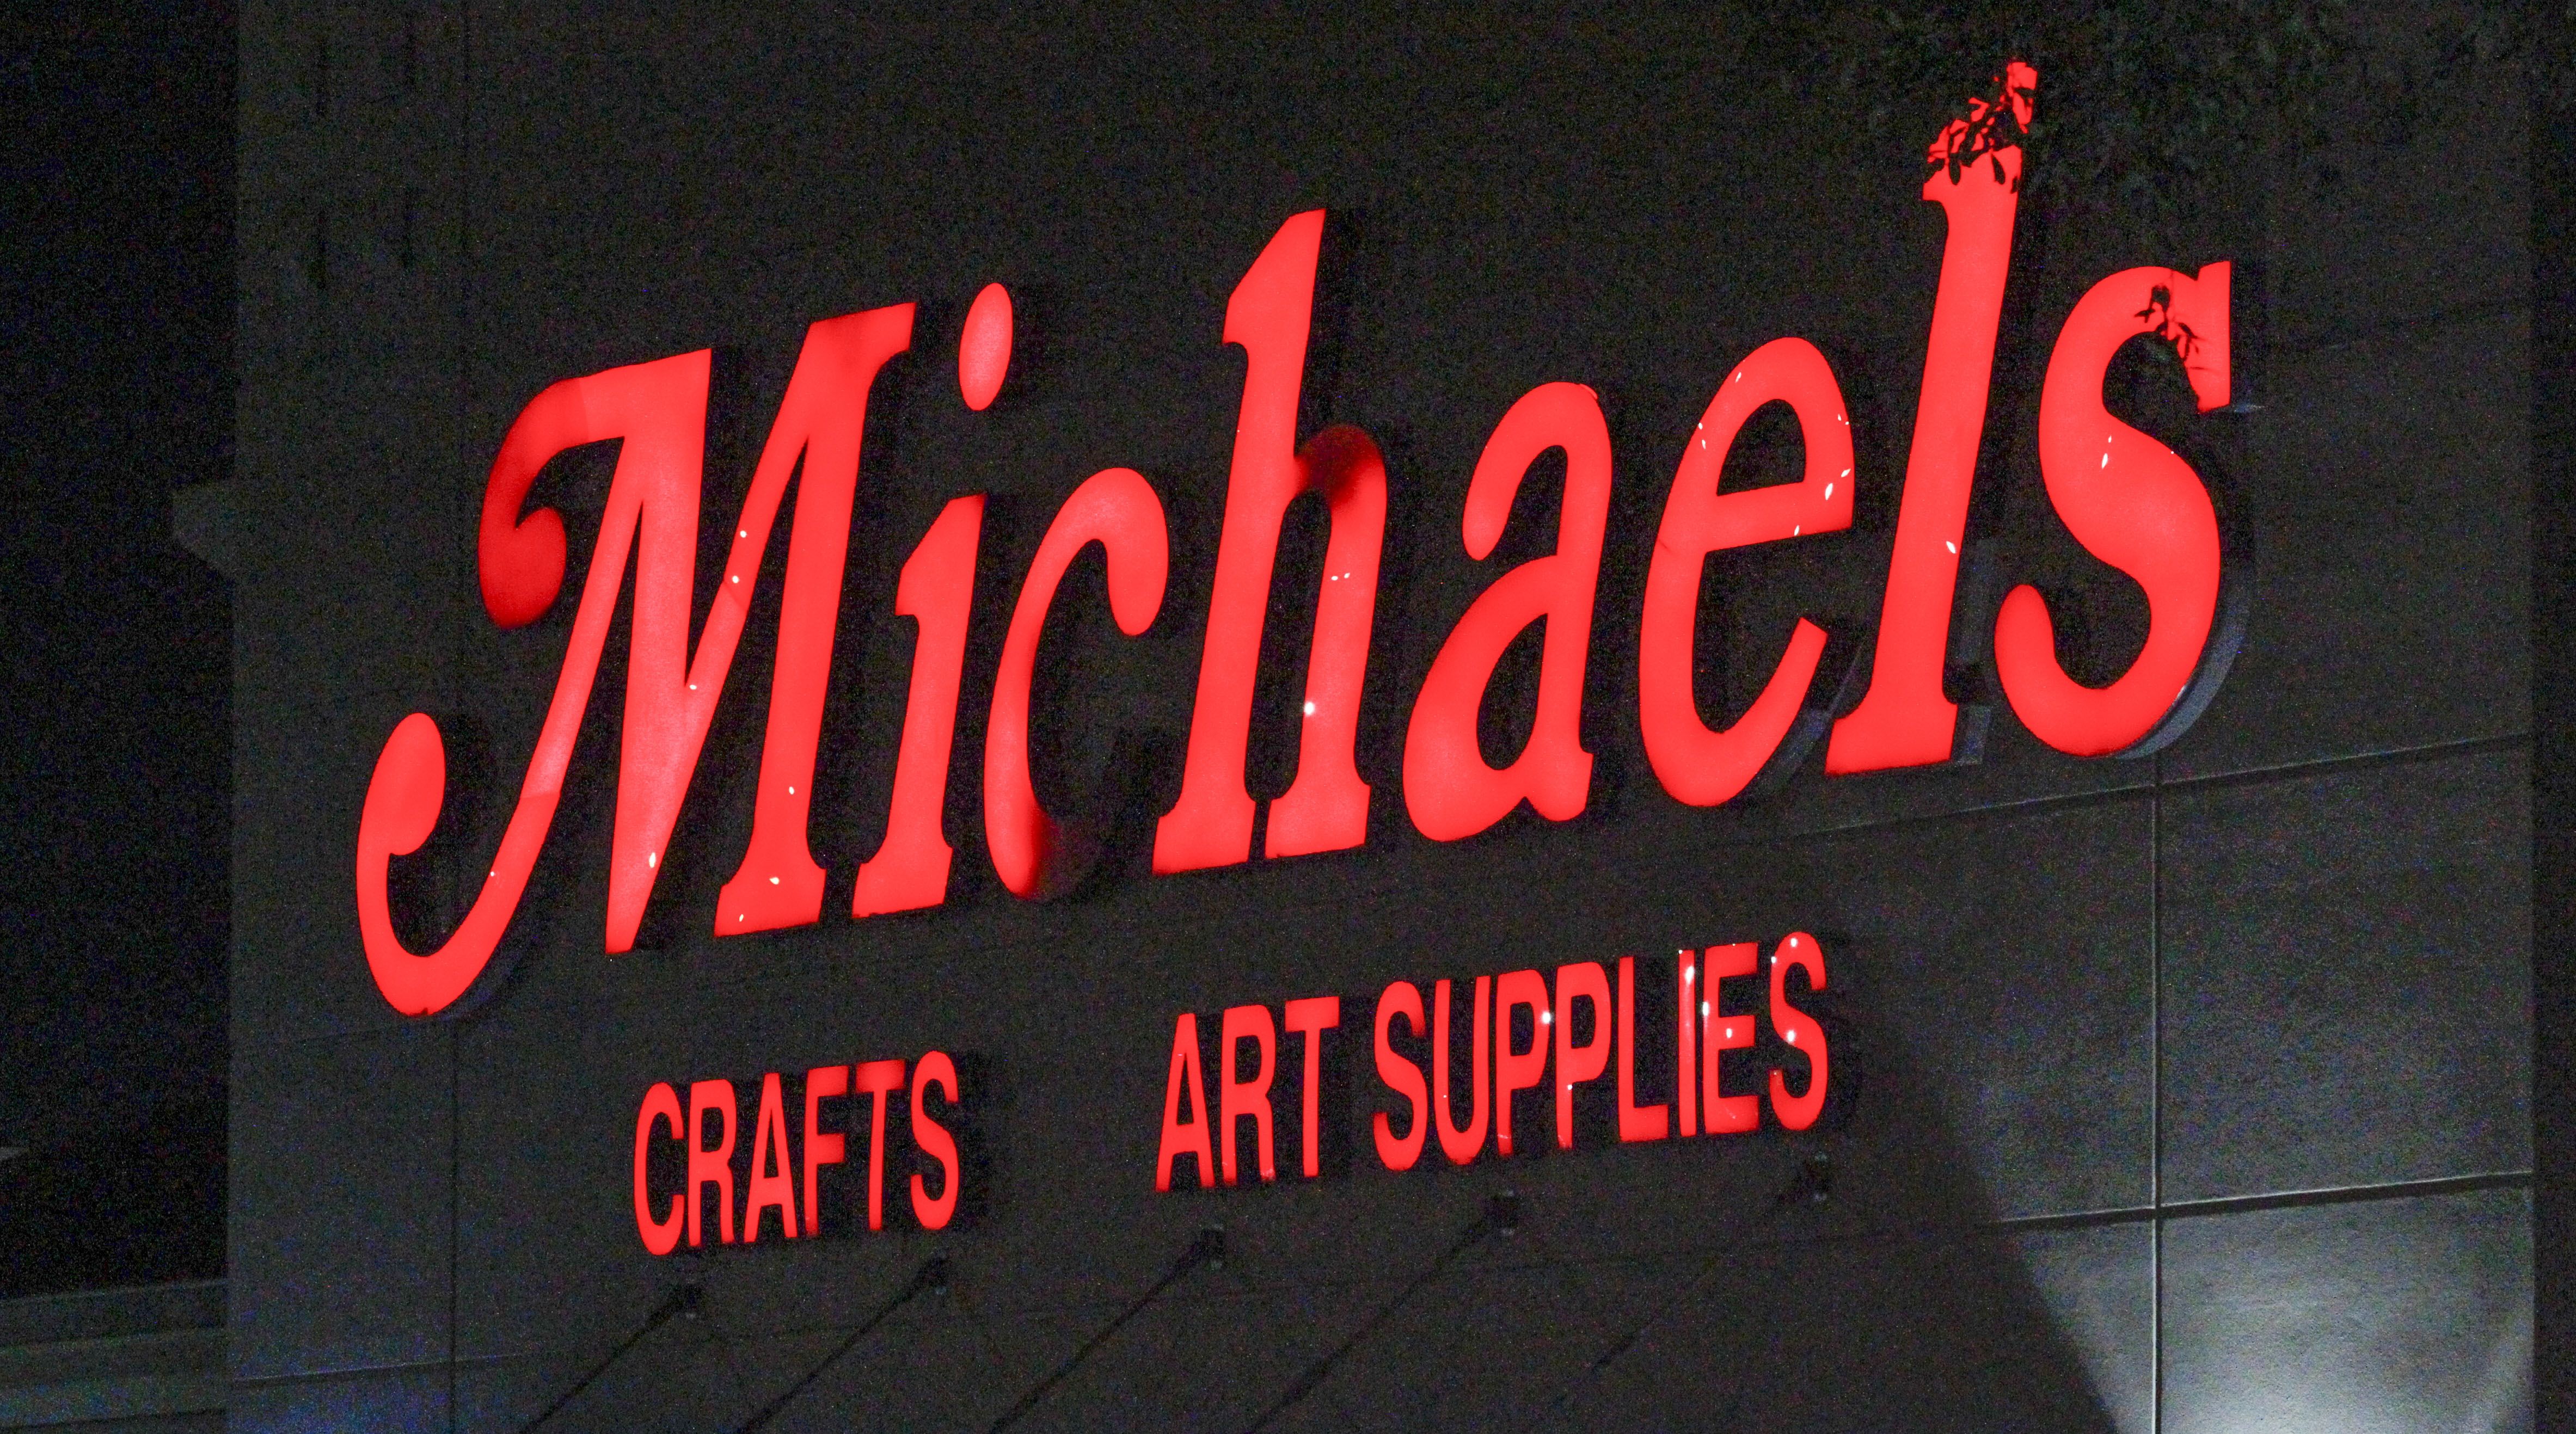 Arts and crafts retailer Michaels hires new CEO from Walmart